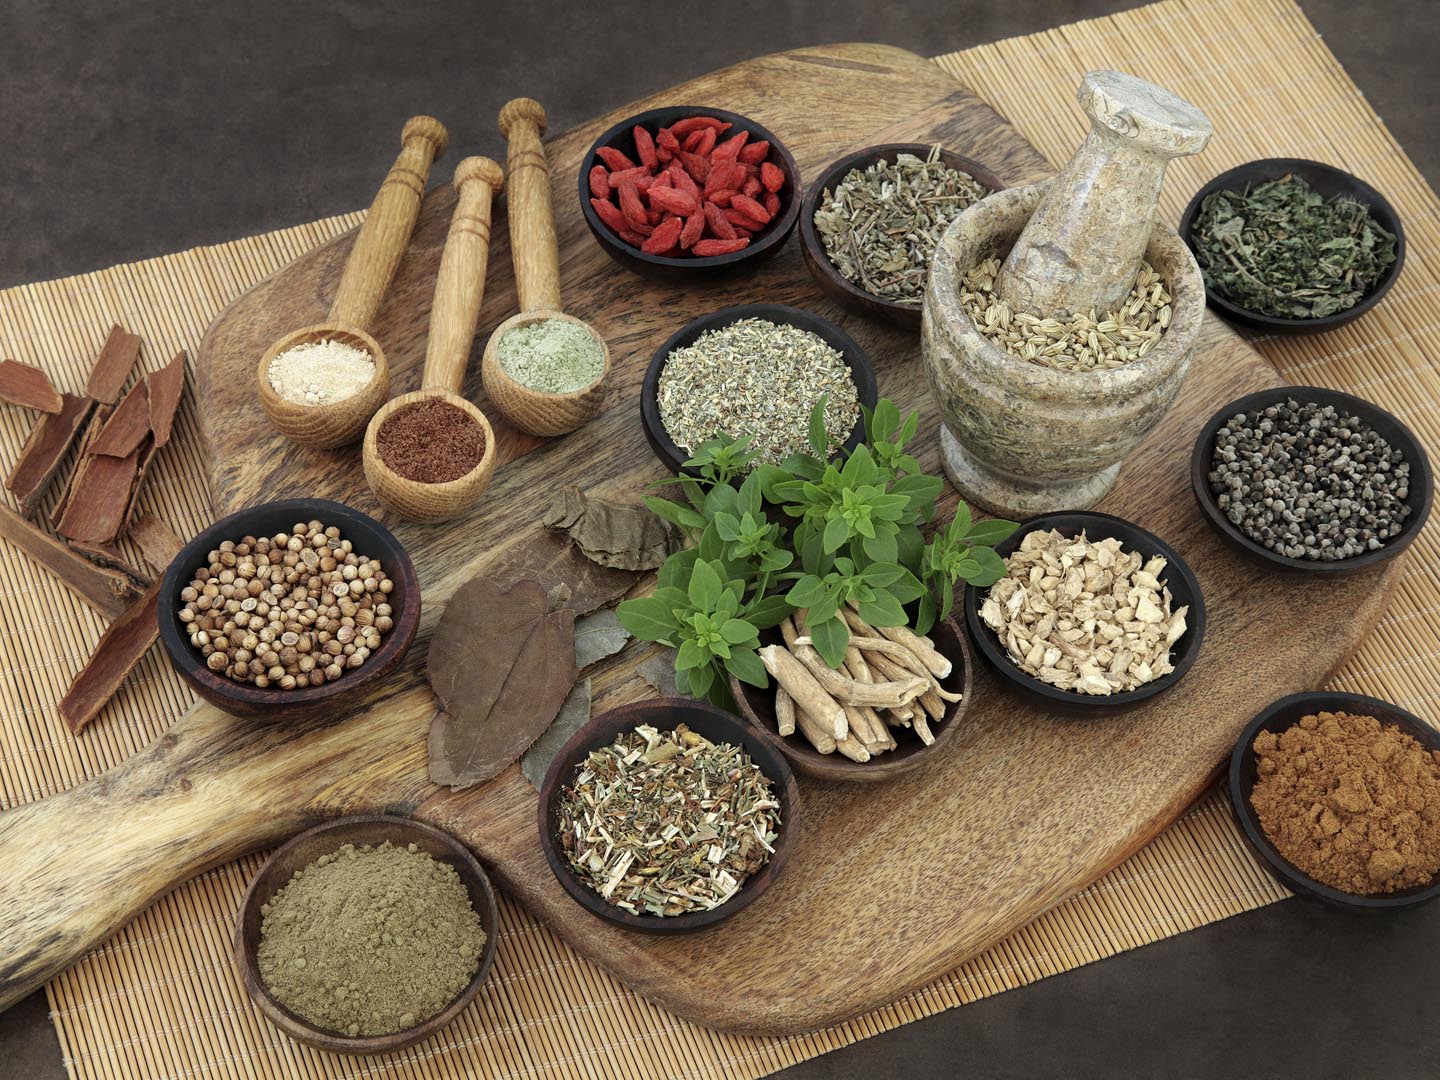 International cooking : Herbs and Spices